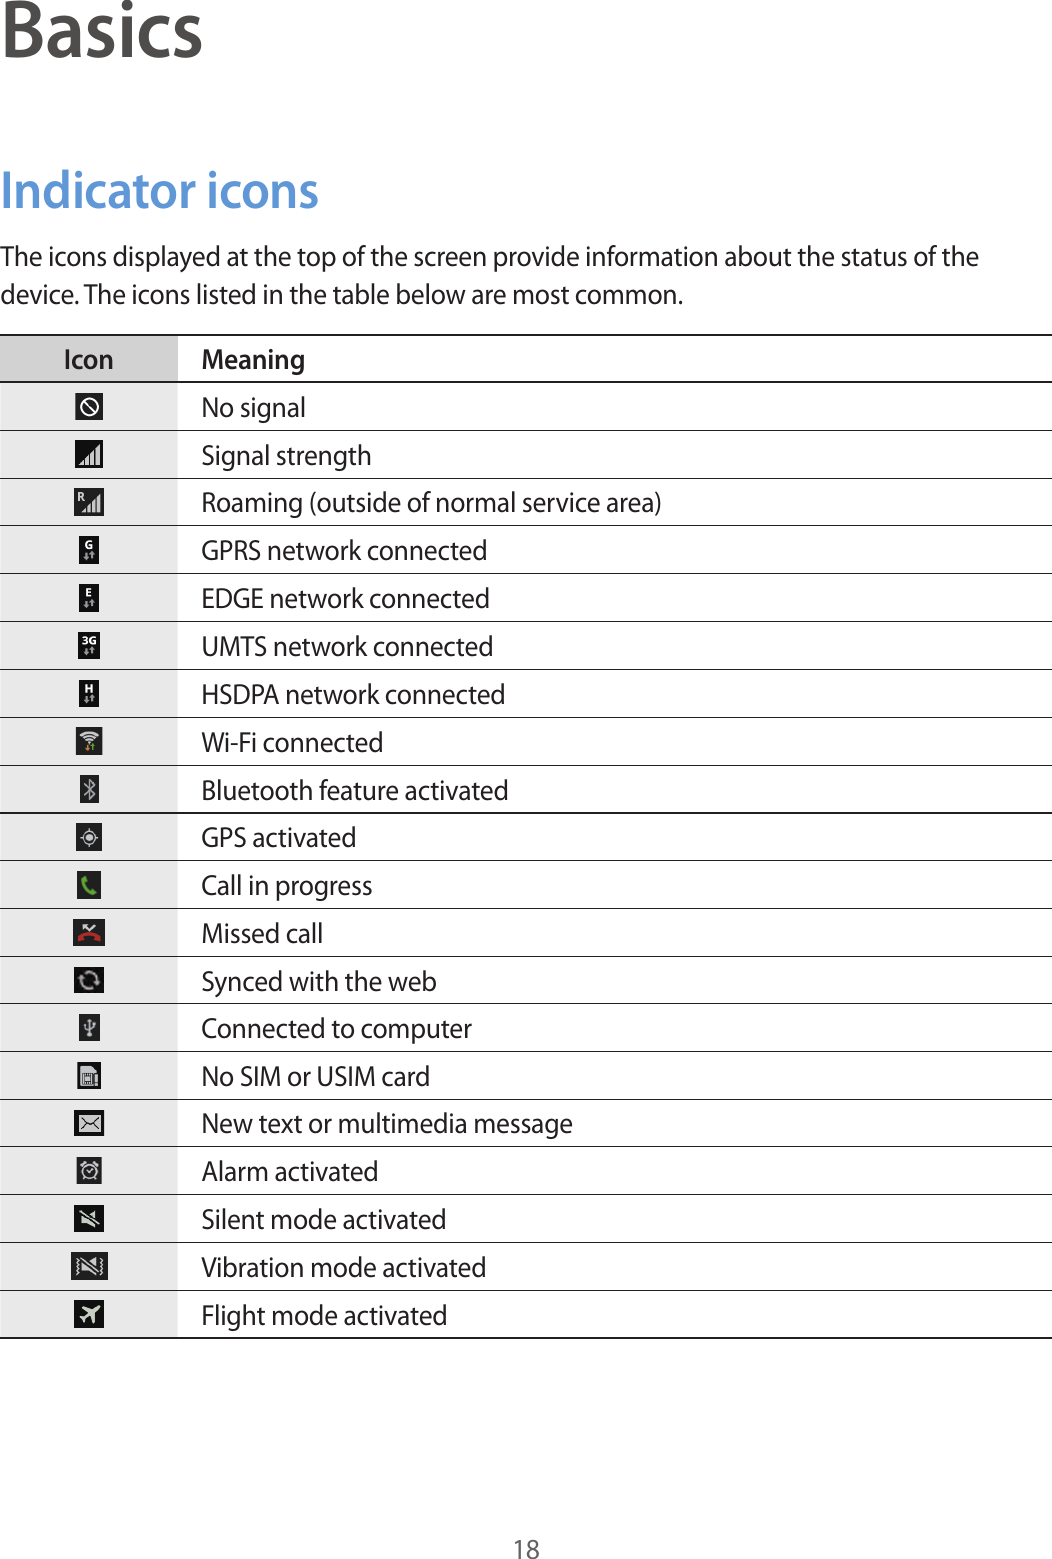 18BasicsIndicator iconsThe icons displayed at the top of the screen provide information about the status of the device. The icons listed in the table below are most common.Icon MeaningNo signalSignal strengthRoaming (outside of normal service area)GPRS network connectedEDGE network connectedUMTS network connectedHSDPA network connectedWi-Fi connectedBluetooth feature activatedGPS activatedCall in progressMissed callSynced with the webConnected to computerNo SIM or USIM cardNew text or multimedia messageAlarm activatedSilent mode activatedVibration mode activatedFlight mode activated